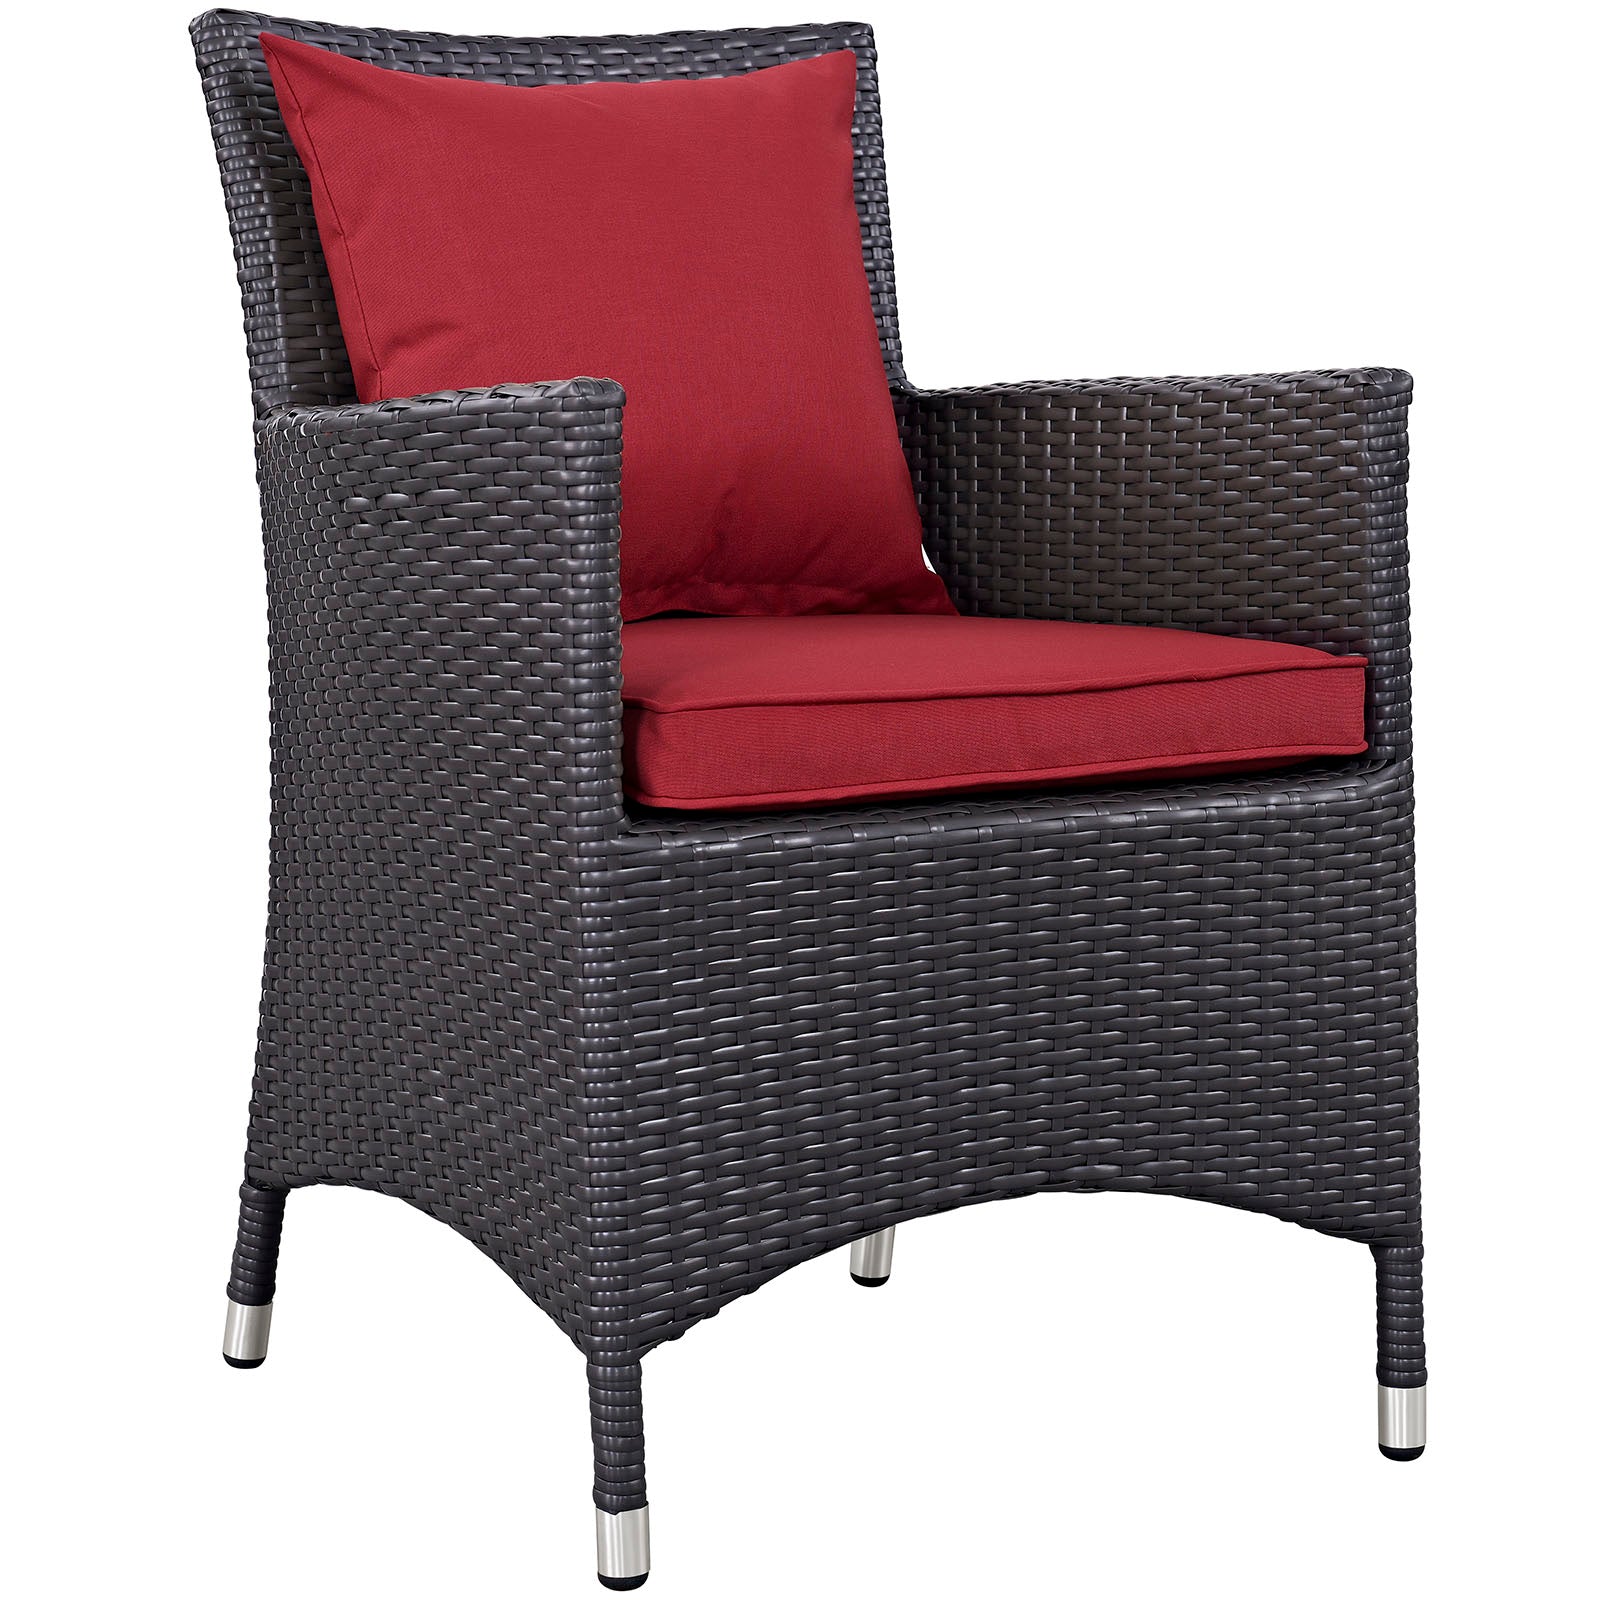 Modway Outdoor Dining Chairs - Convene Dining Outdoor Patio Armchair Espresso Red